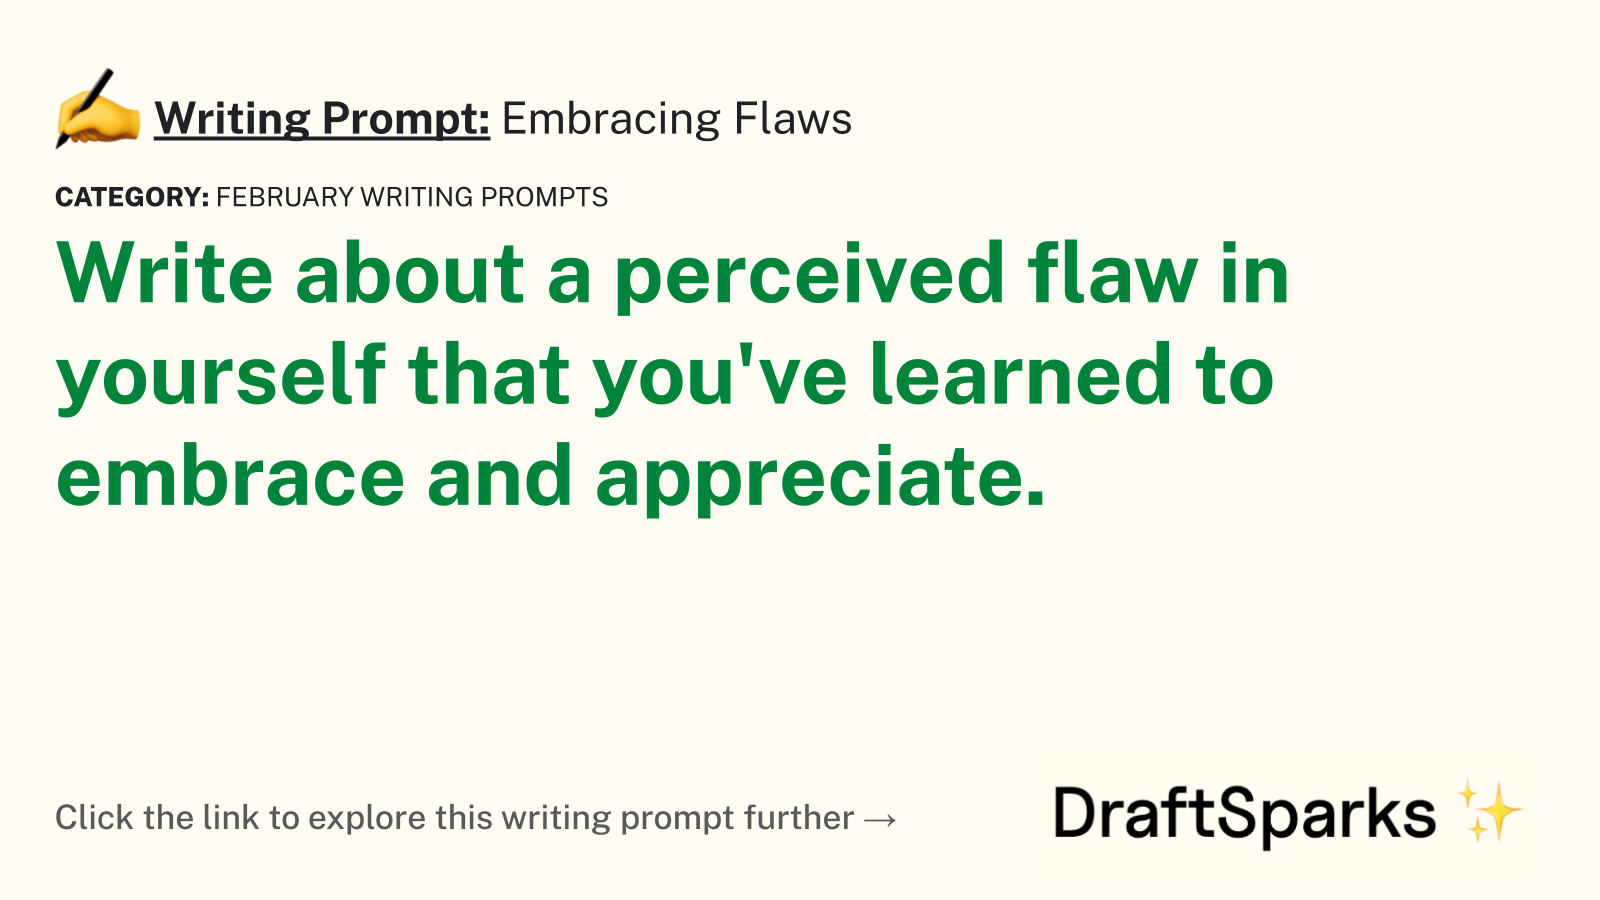 Embracing Flaws